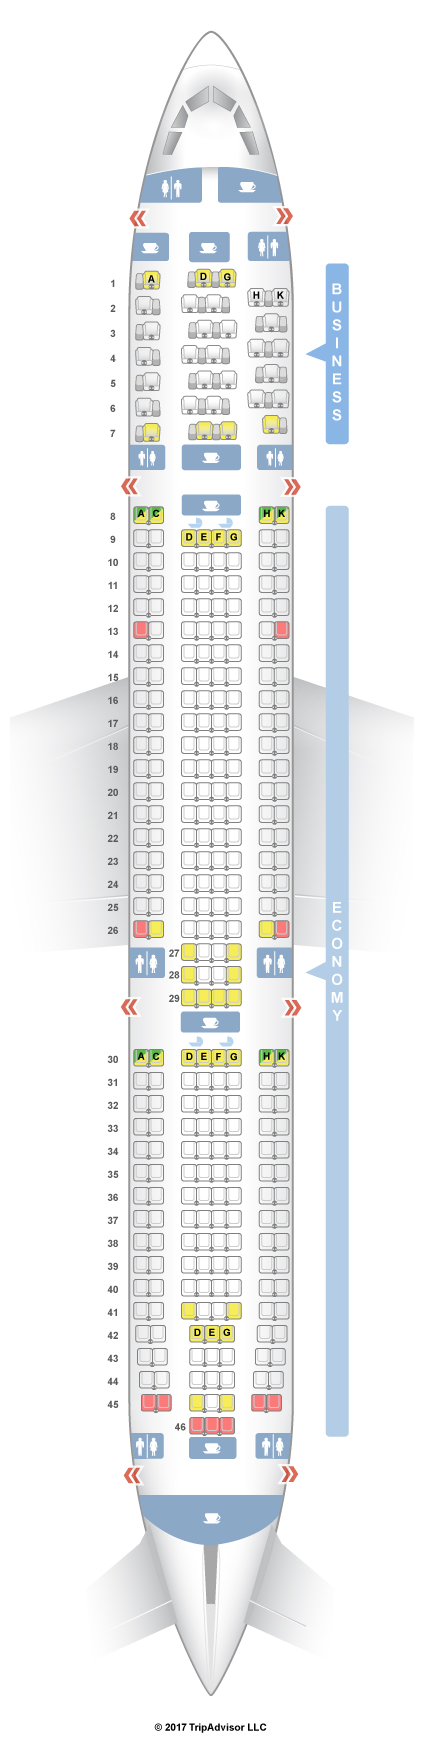 Aer Lingus A330 300 Seat Map